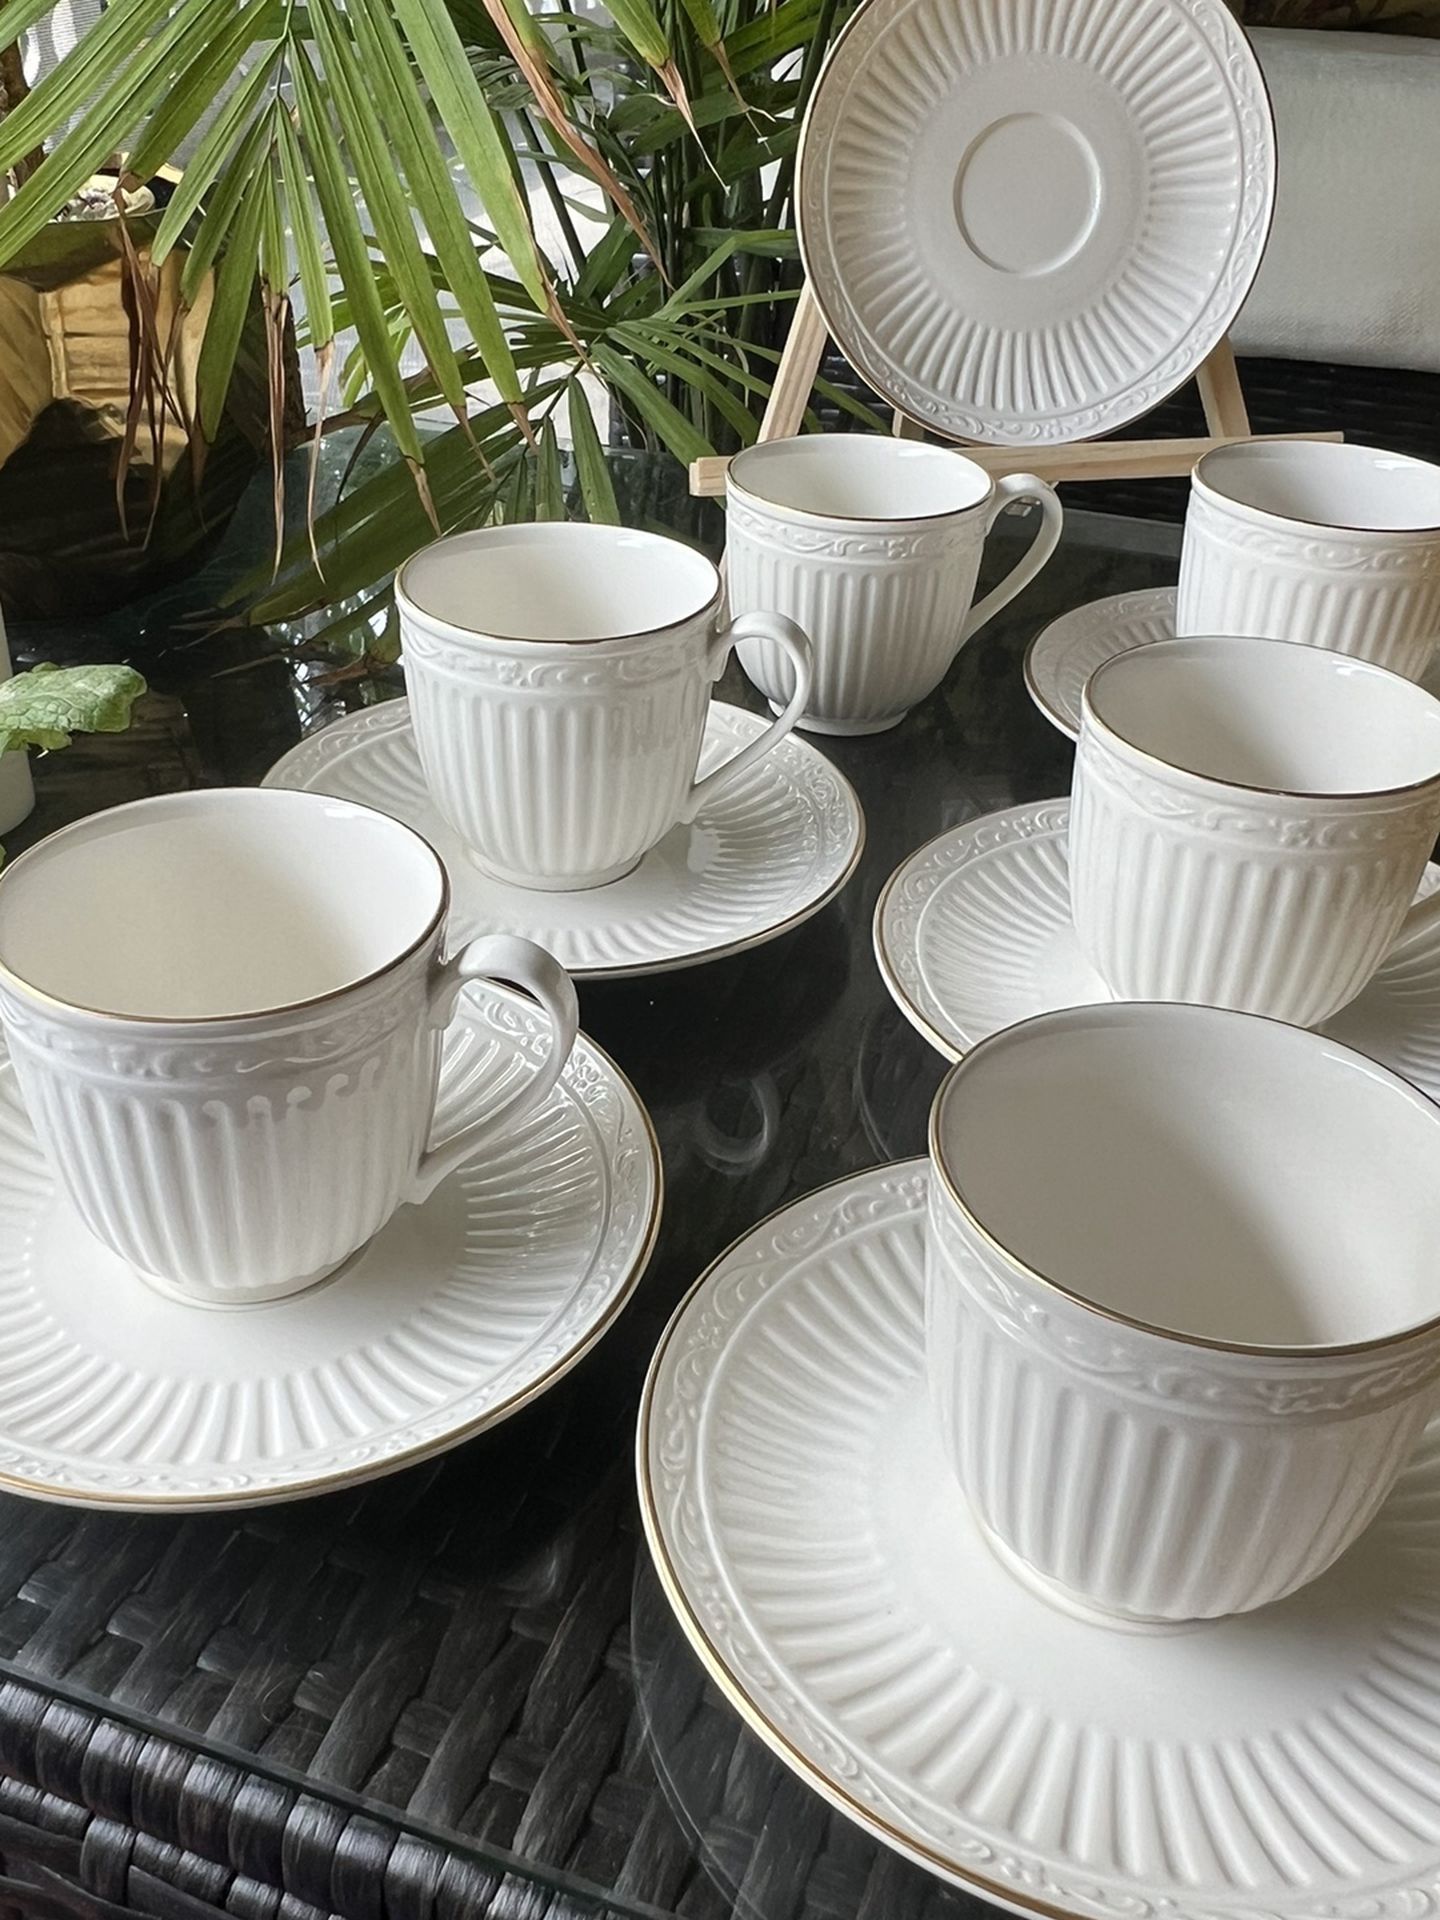 MIKASA Countryside With The Golden rim. Set Of 6 Cups And Saucers. Vintage In Excellent Condition. Very Rear. 